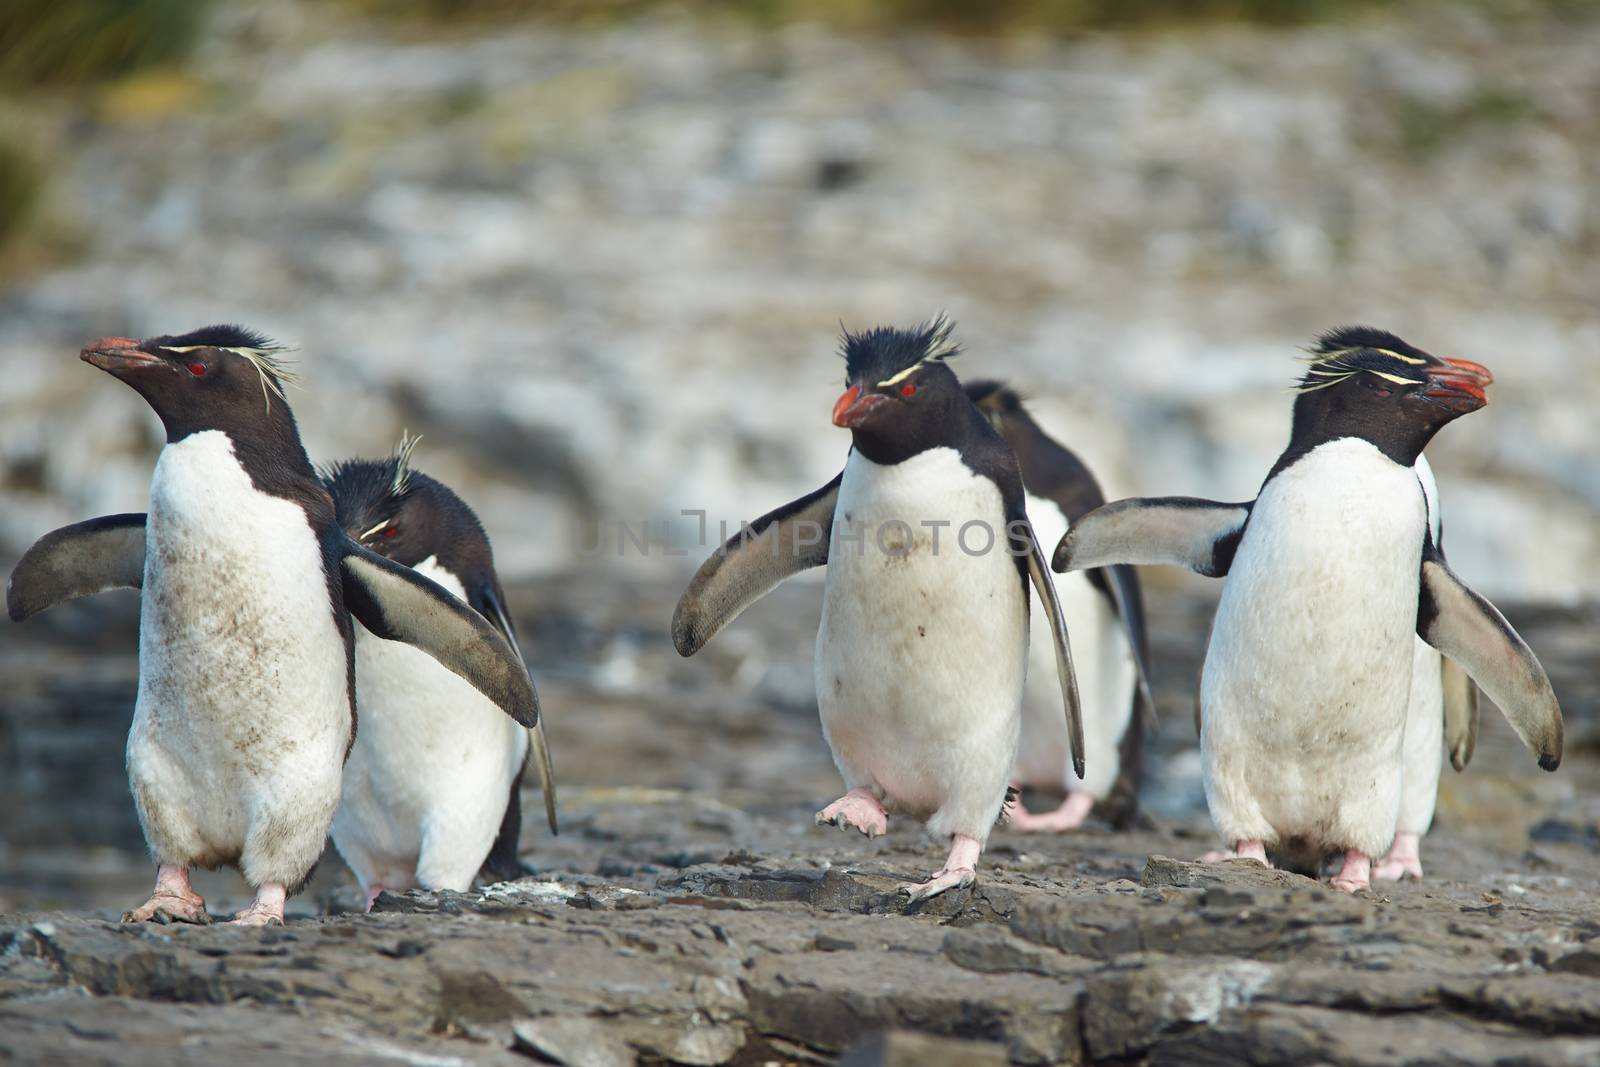 Group of Rockhopper Penguins (Eudyptes chrysocome) at their nesting site on the cliffs of Bleaker Island in the Falkland Islands.